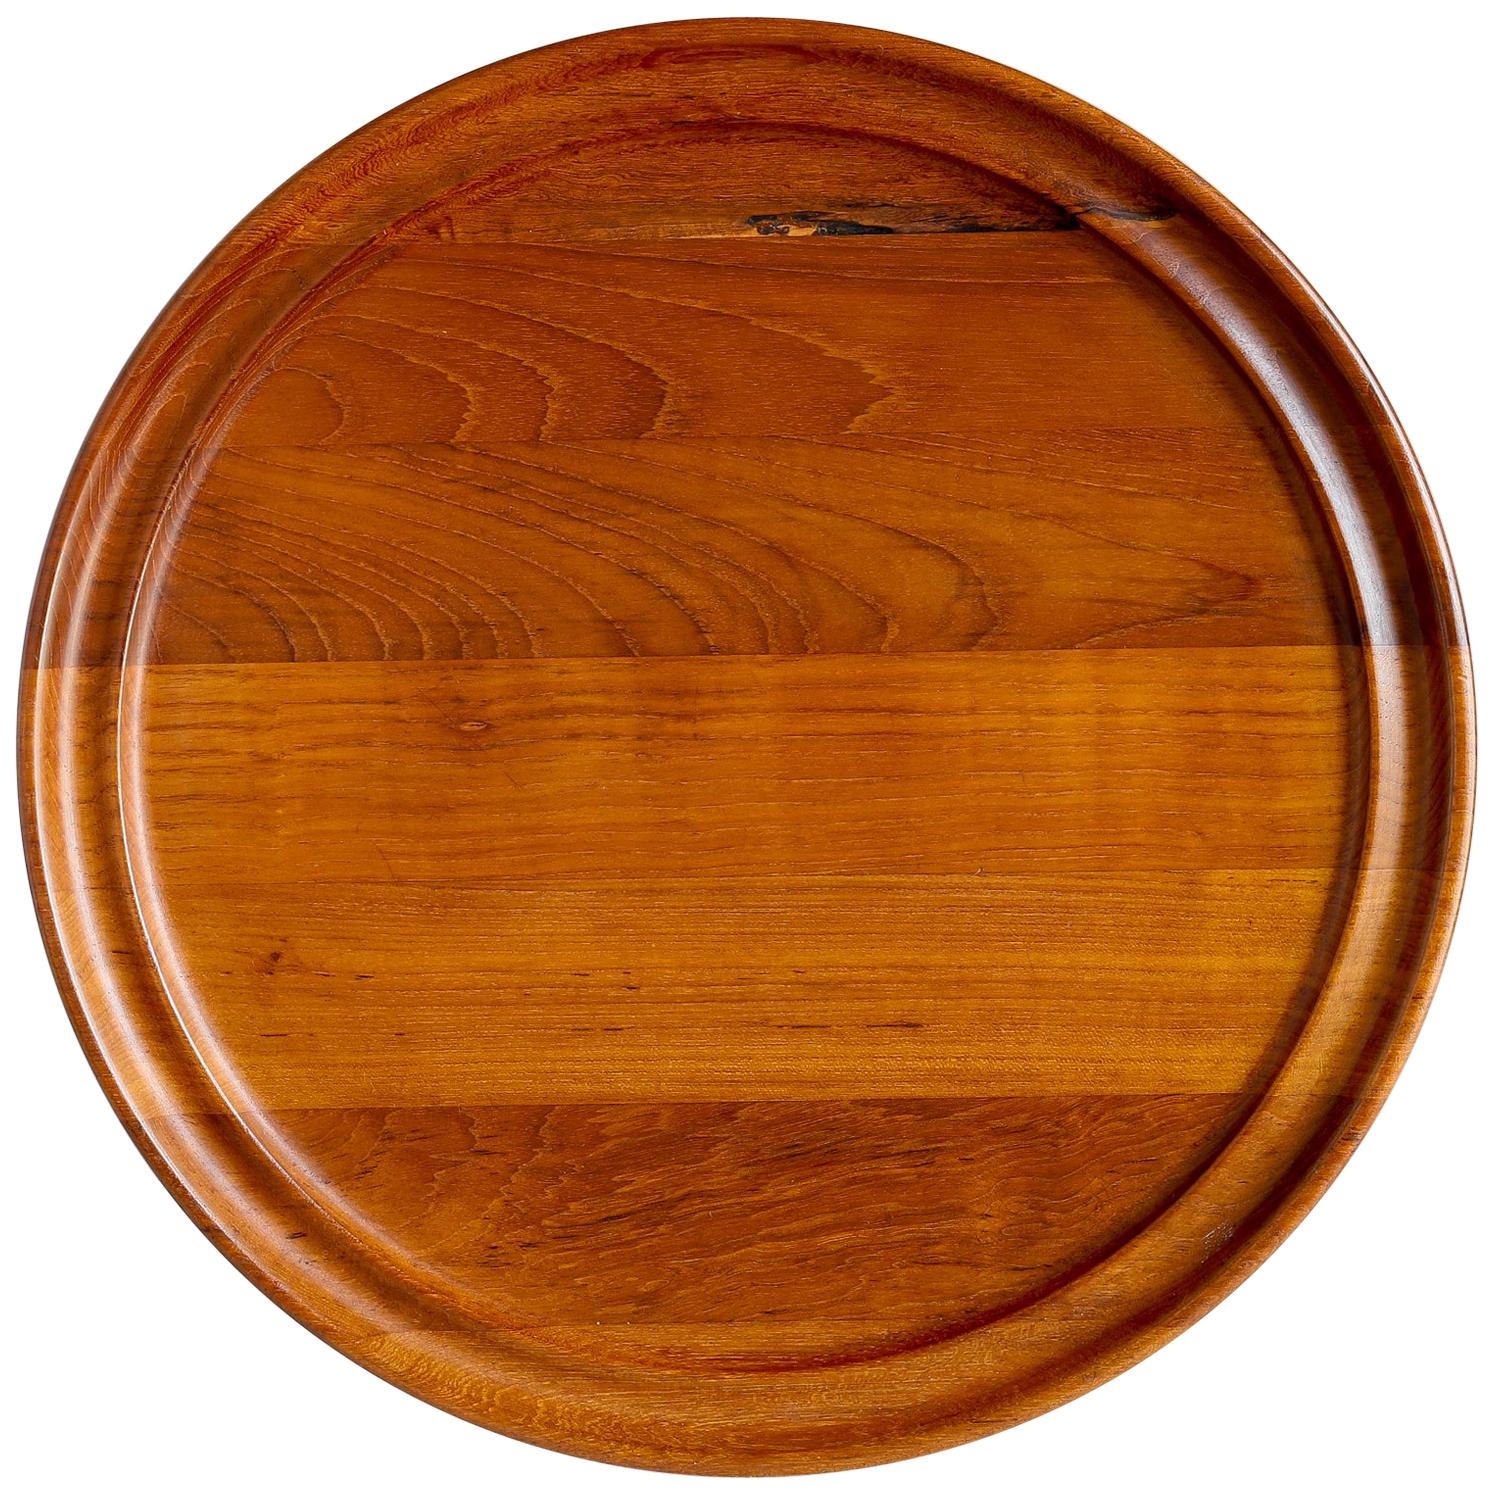 Henning Koppel Teak Tray for Georg Jensen, Staved Wood Round Serving Tray For Sale